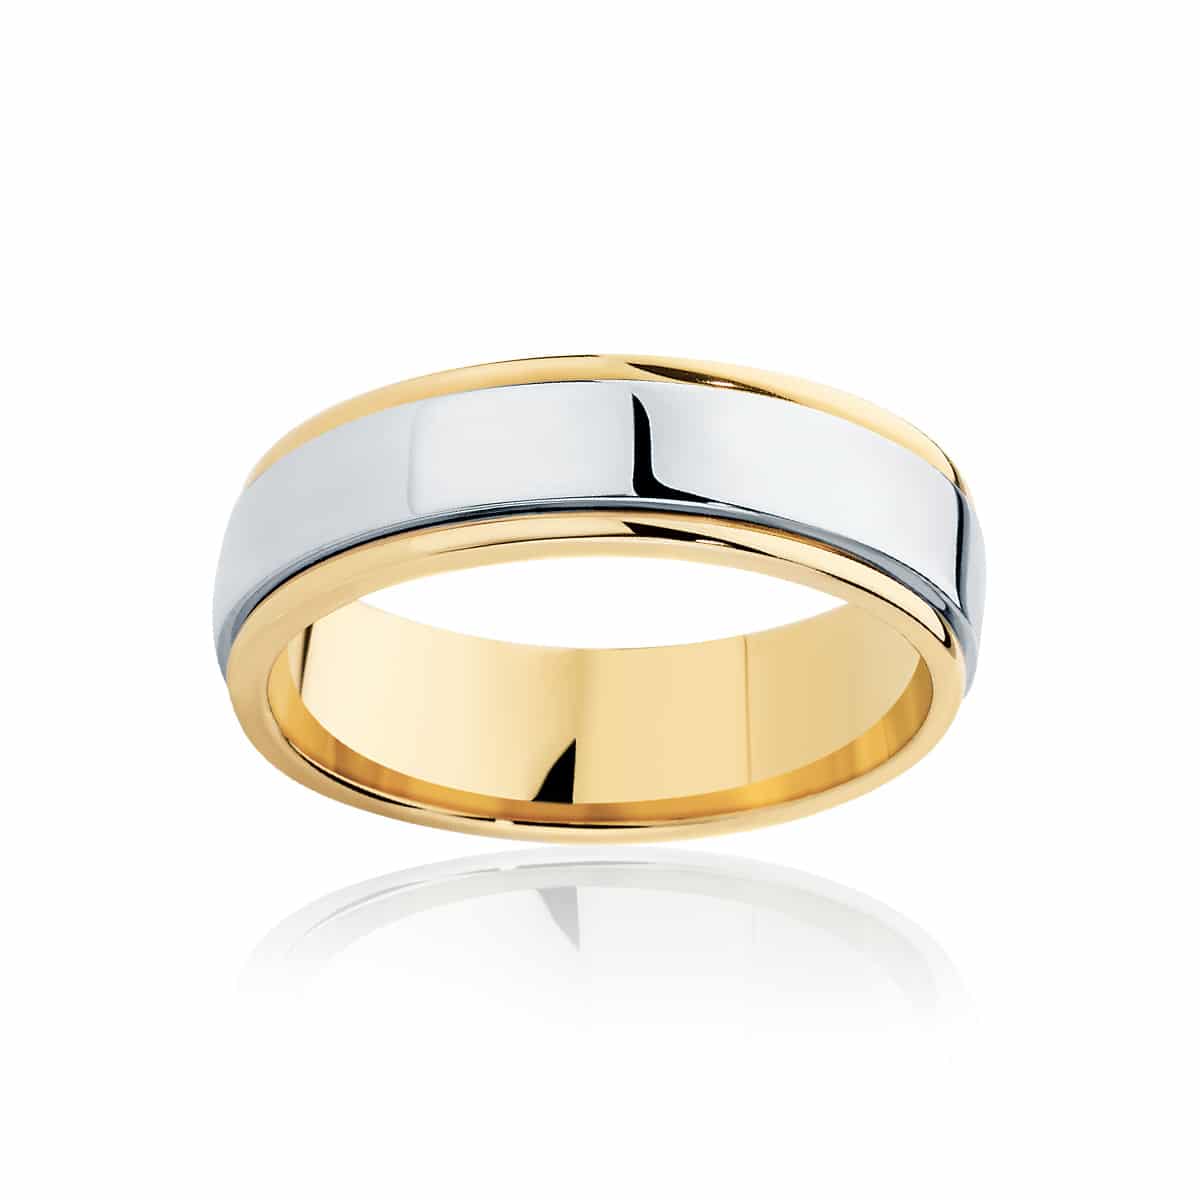 Mens Two Tone Yellow Gold Wedding Ring|Union